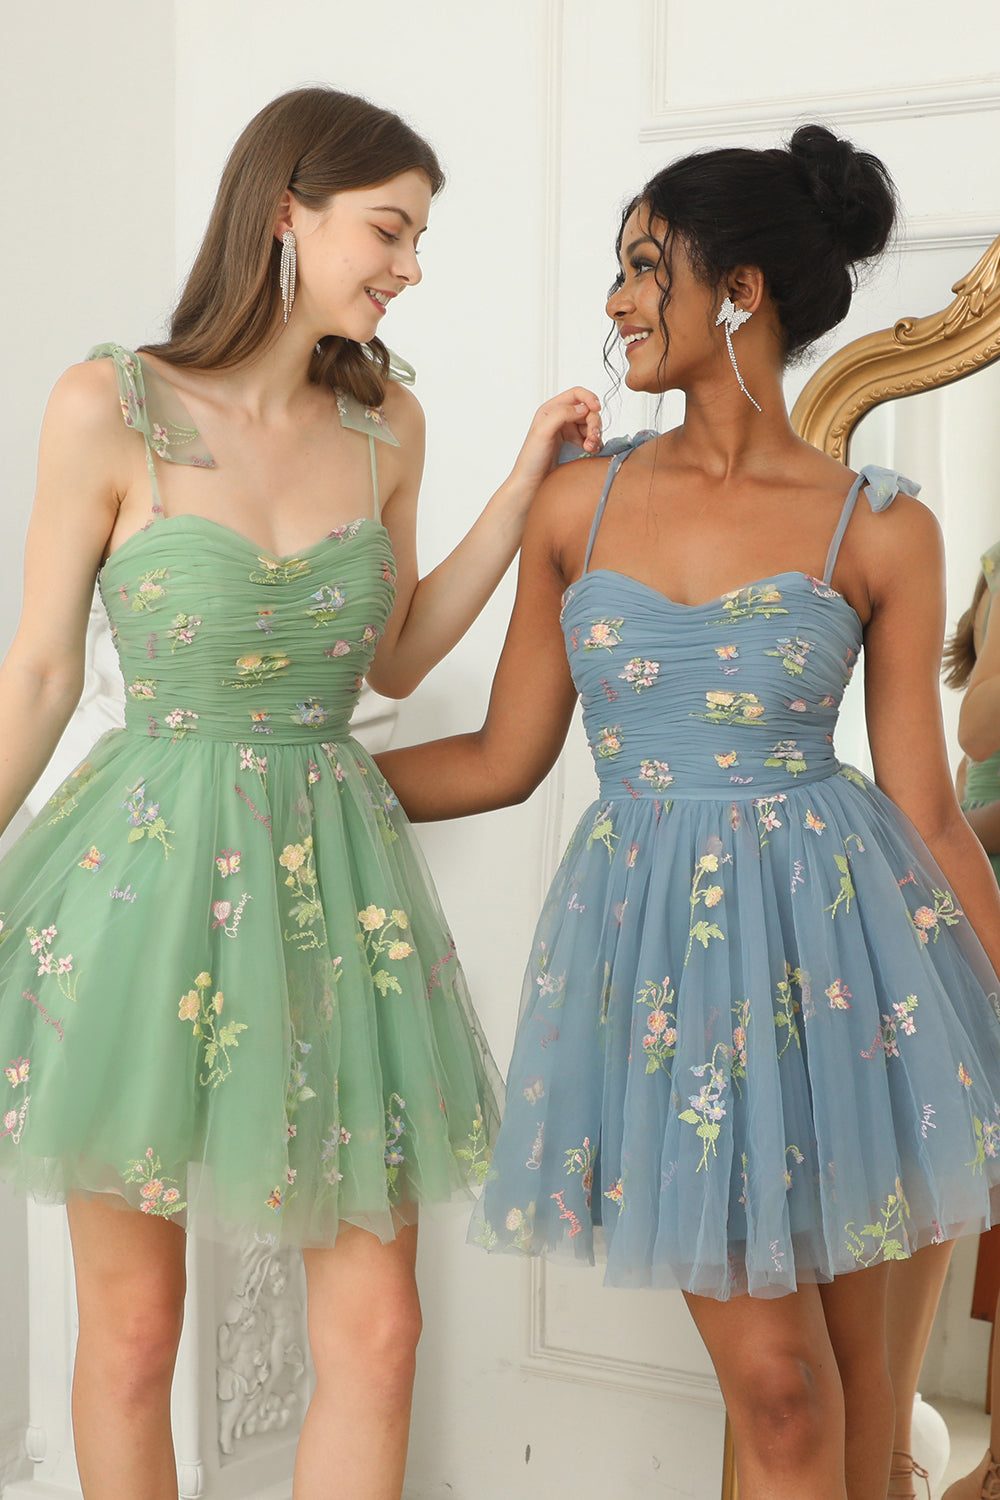 Cute A Line Spaghetti Straps Champagne Homecoming Dress with Embroidery